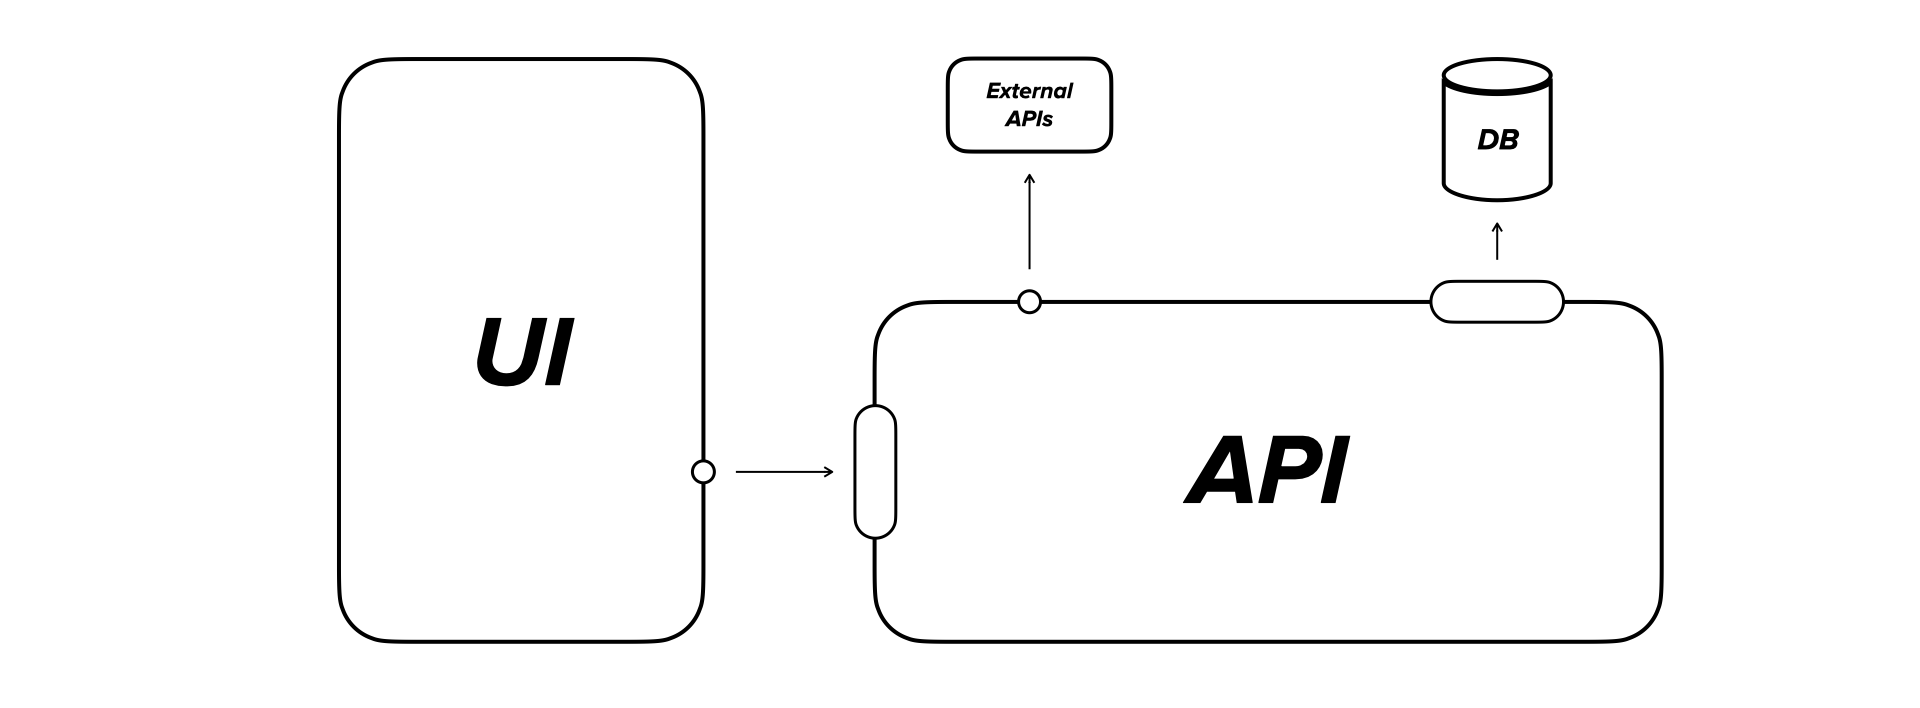 Architecture diagram depicting a User Interface consuming an API, which is connected to a Database and consuming External APIs as well